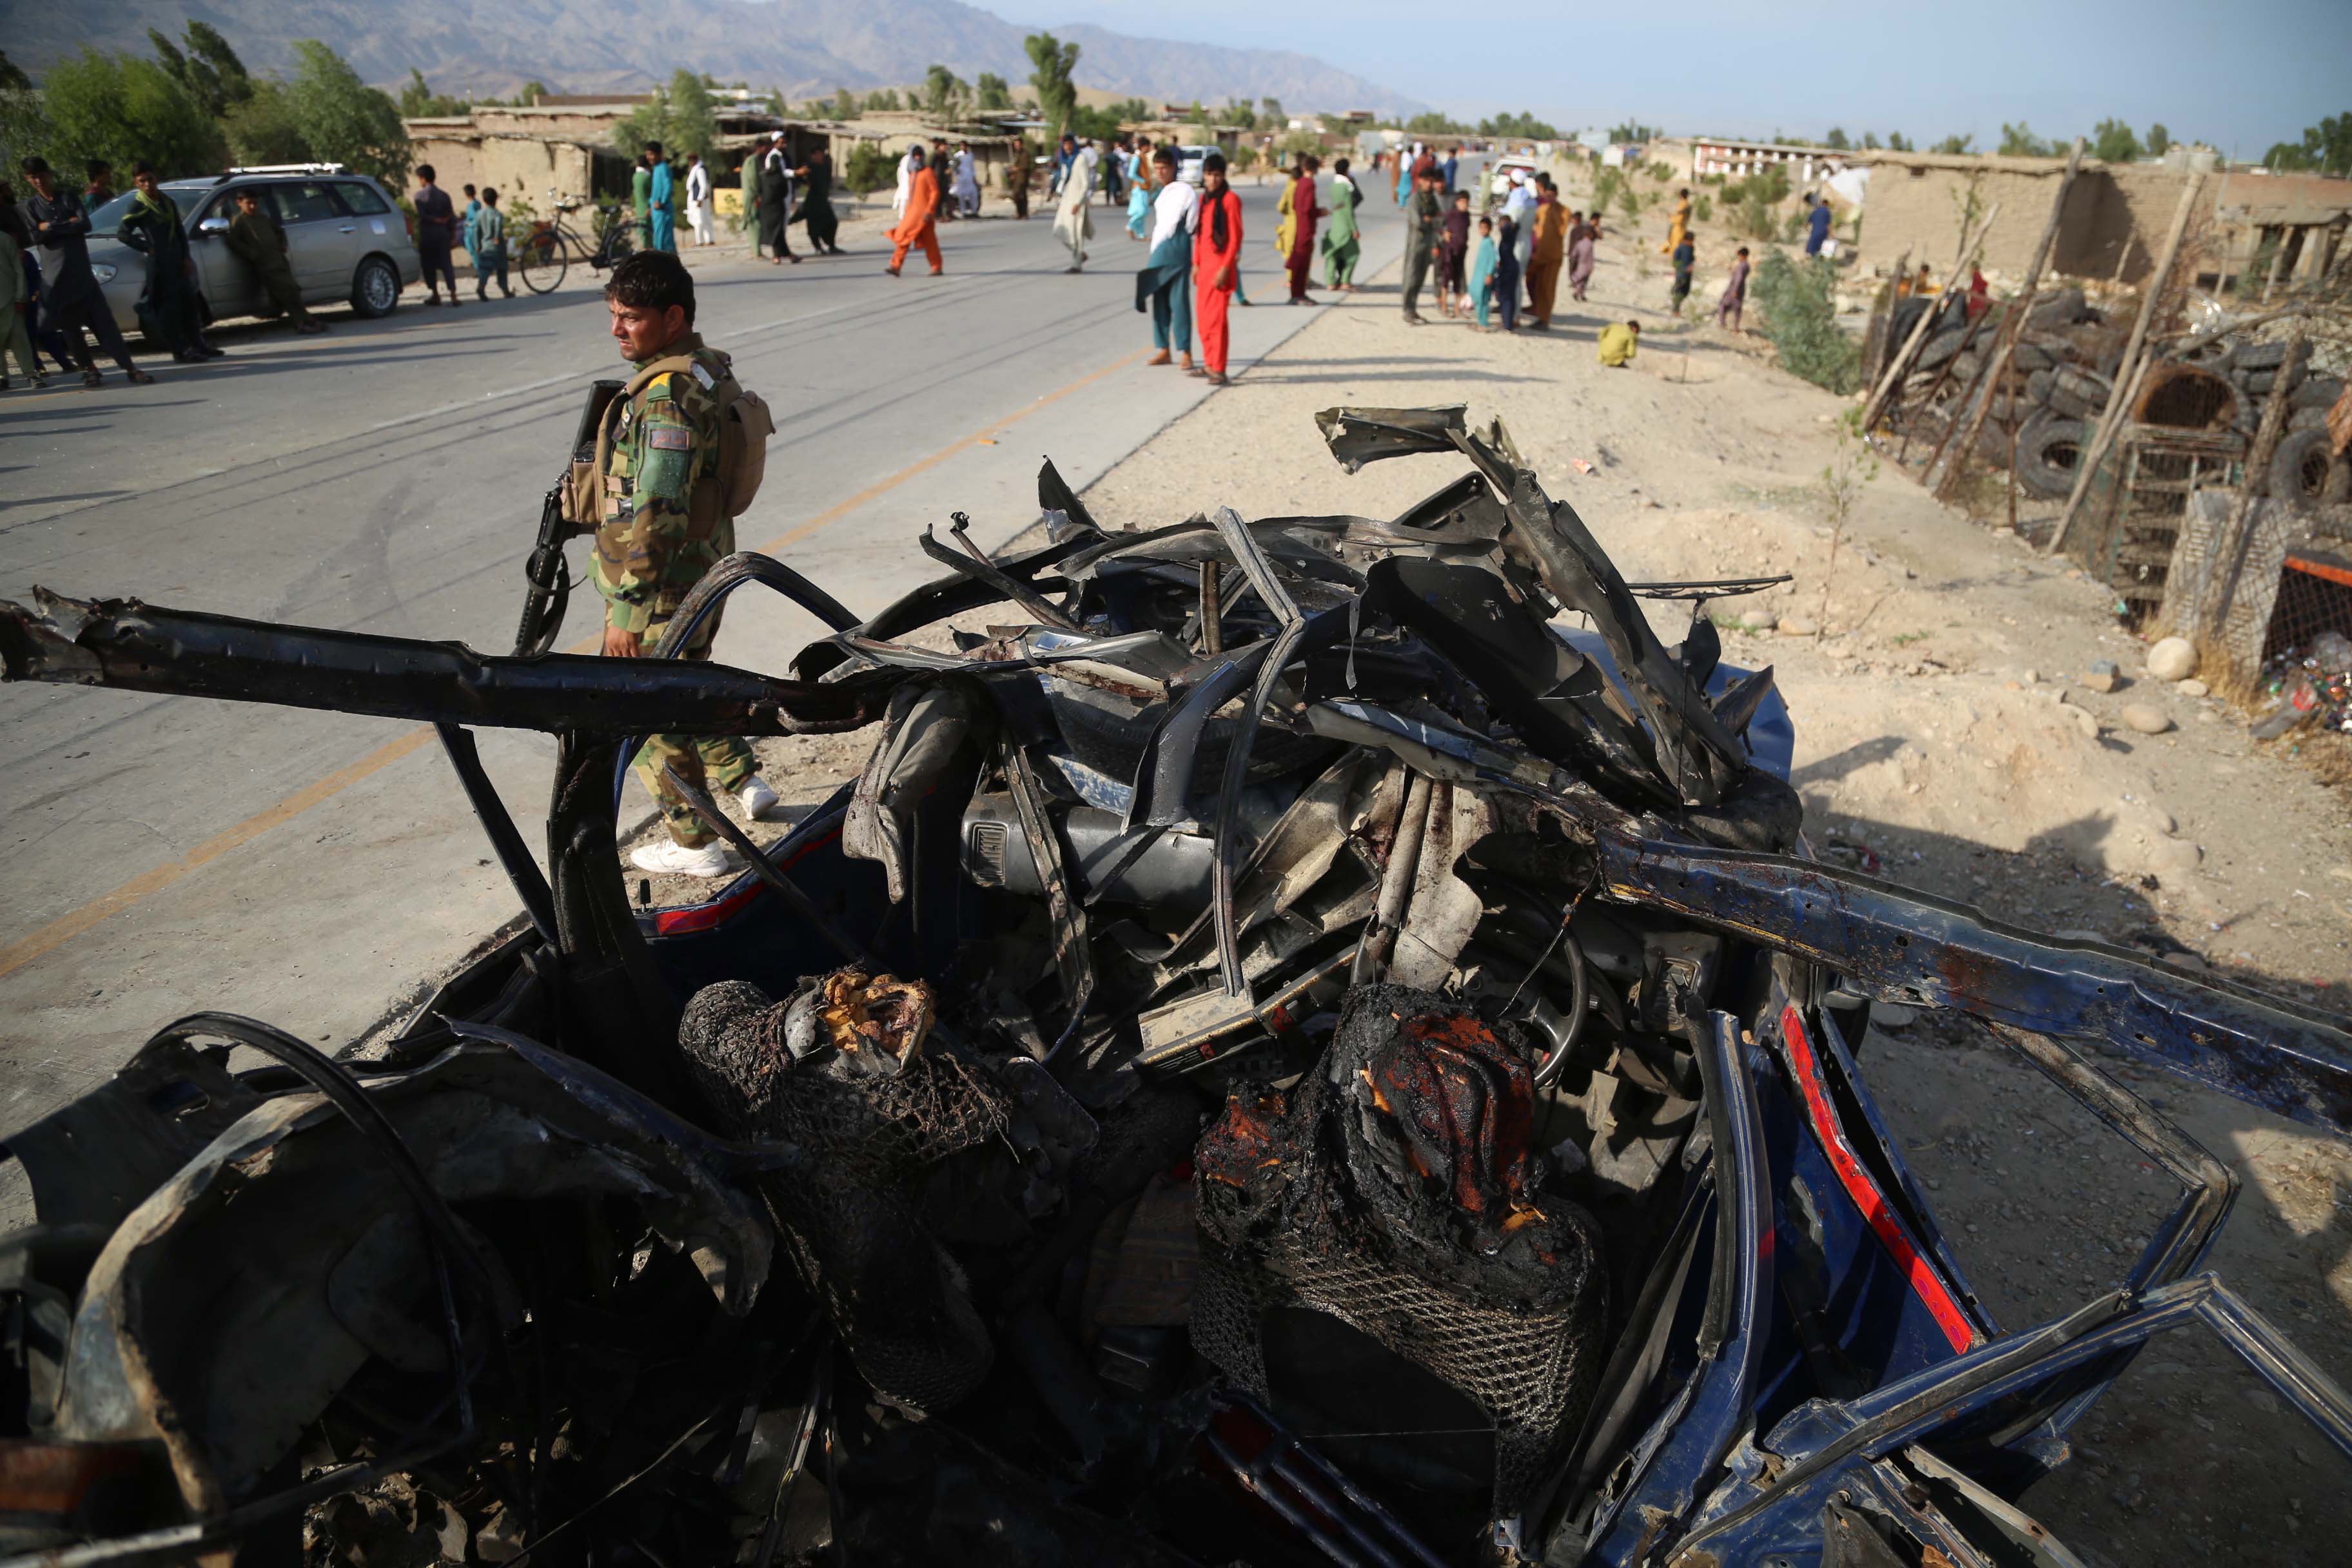 The remains of a vehicle blown up by a bomb blast that killed six civilians on the outskirts of Jalalabad last week